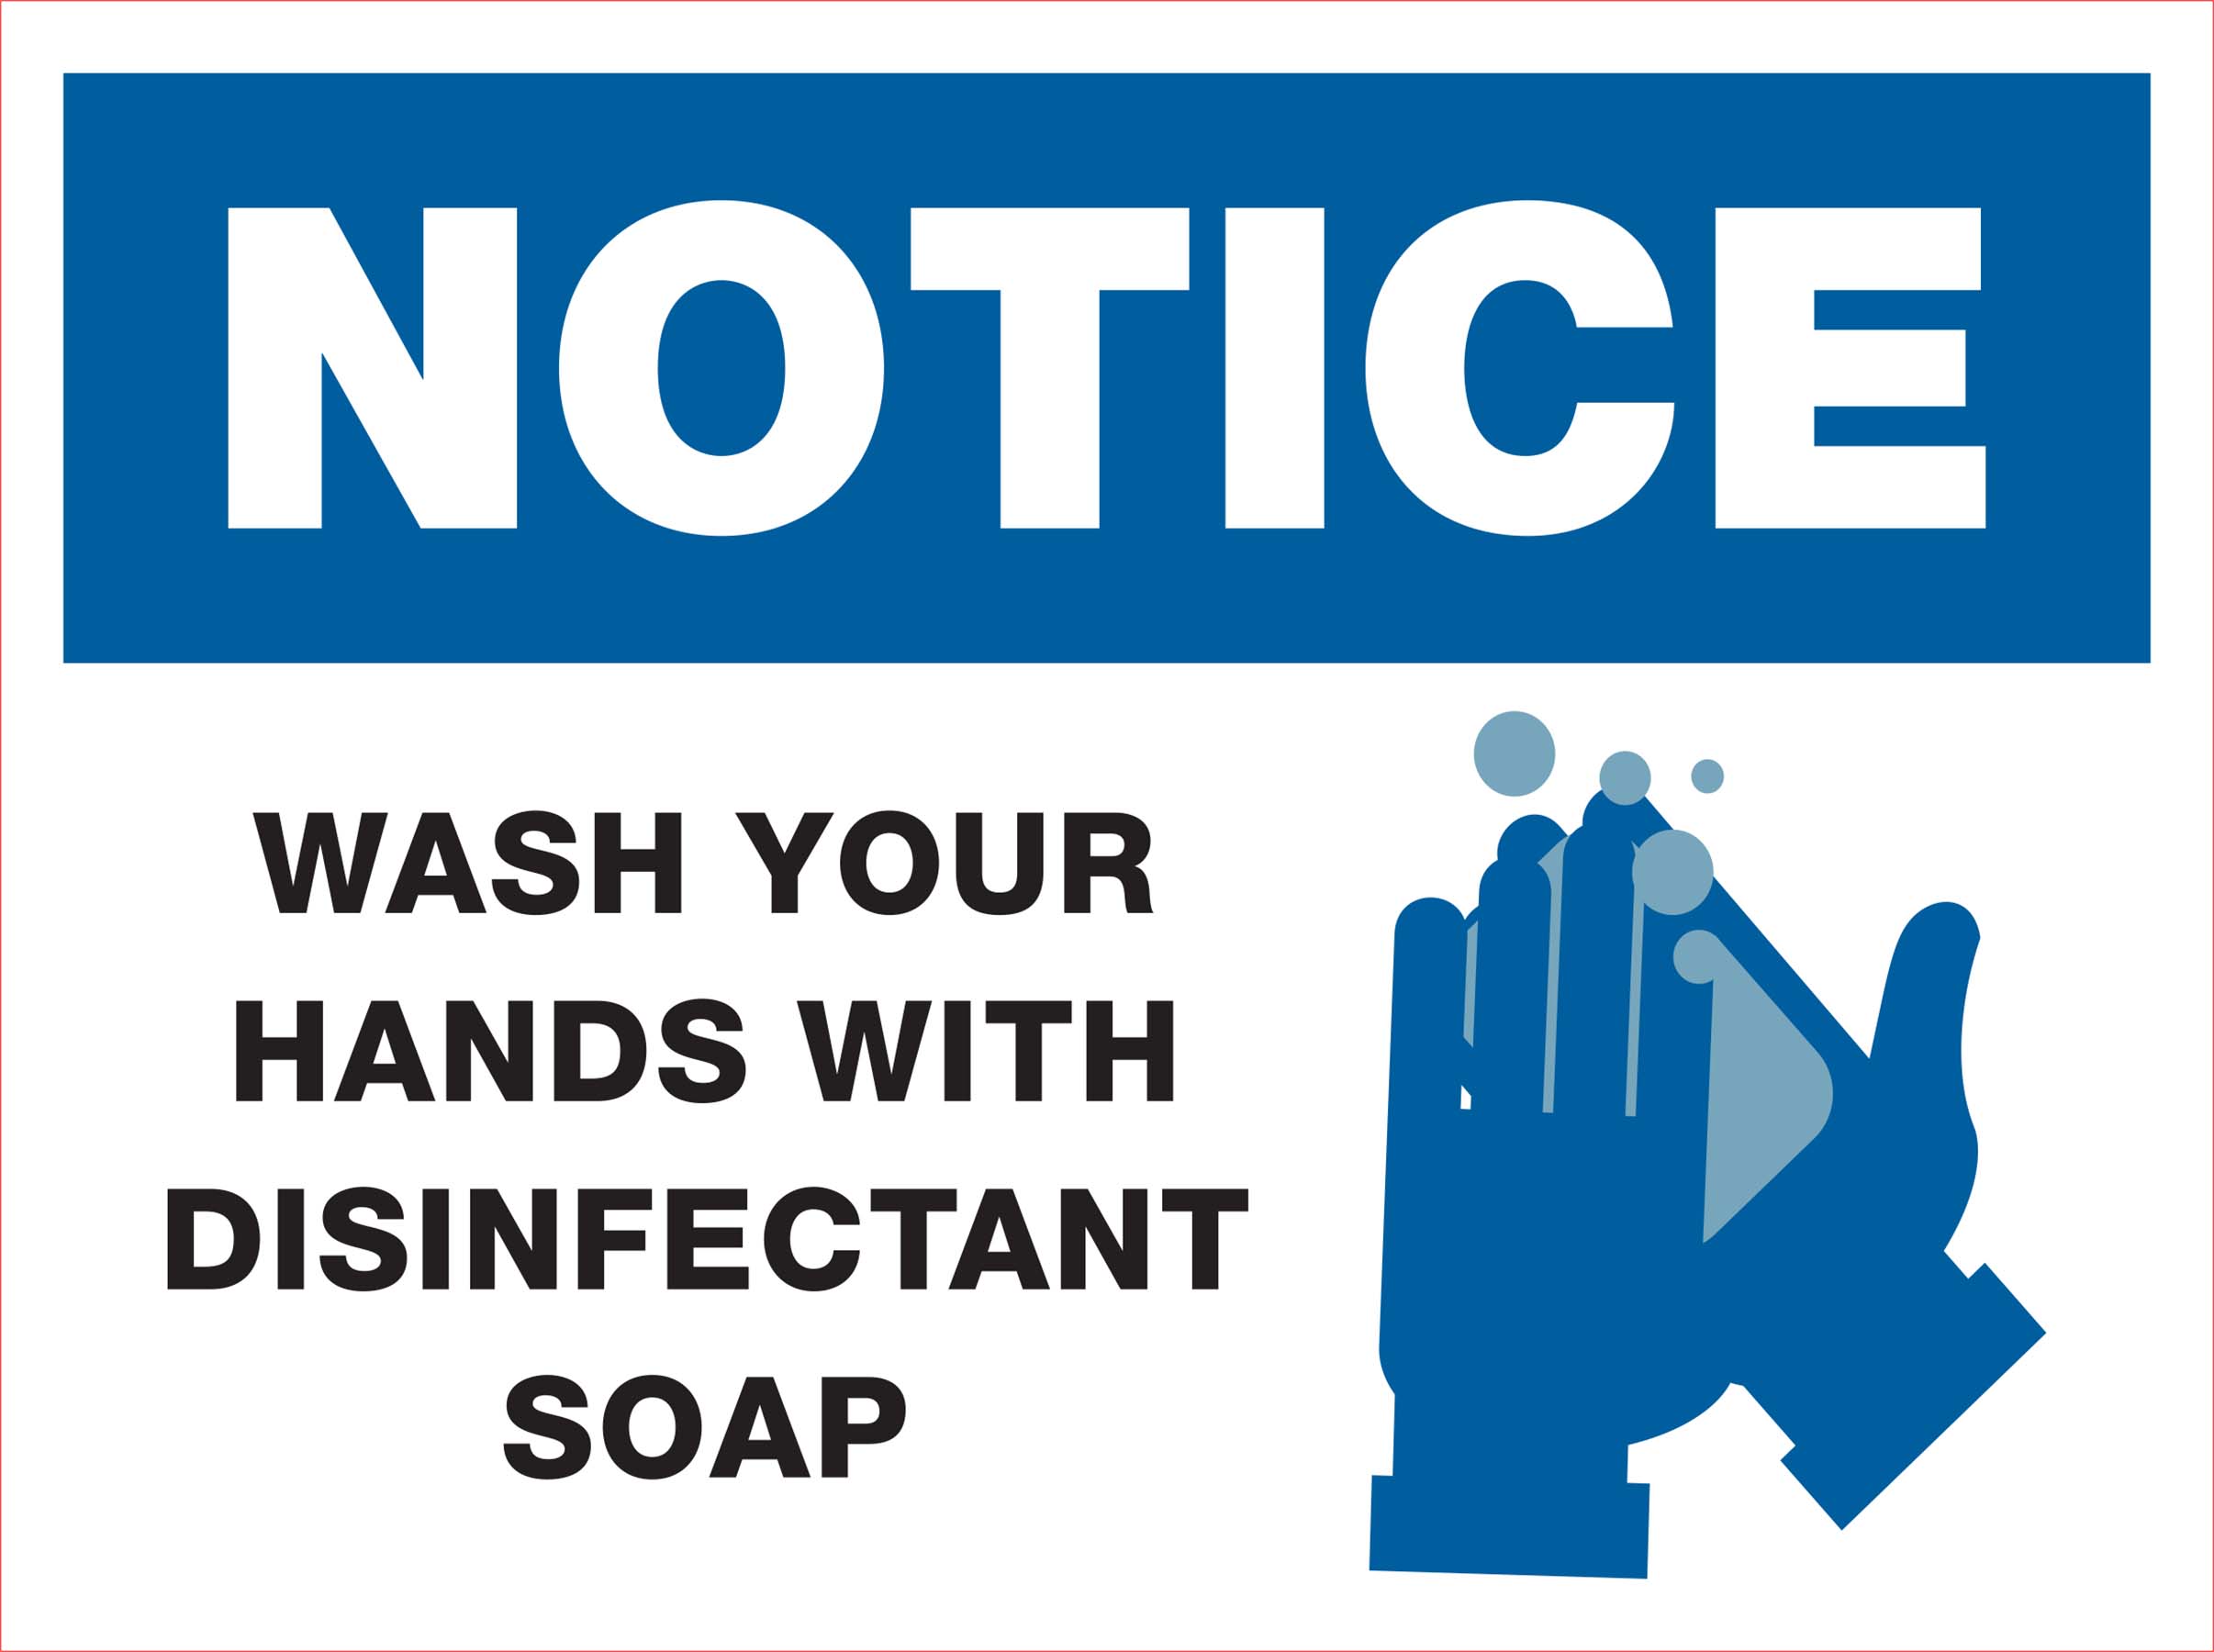 SOA - Wash Hands Disinfectant Soap 6" x 8" Decal - 4 pack